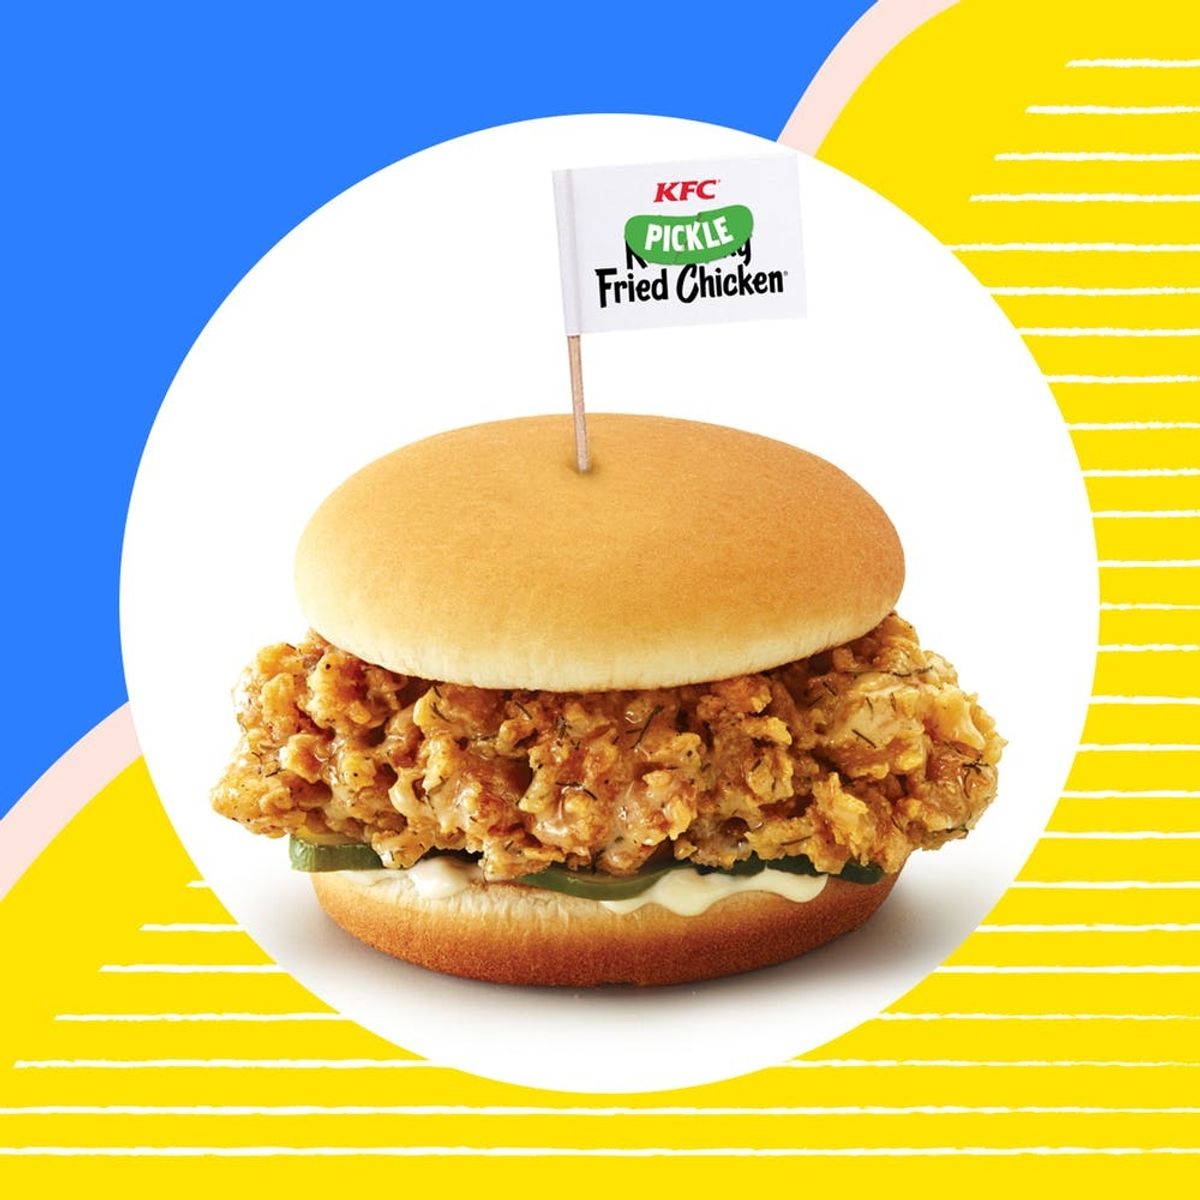 KFC’s Latest Fried Chicken Is Brilliantly Pickle-Flavored